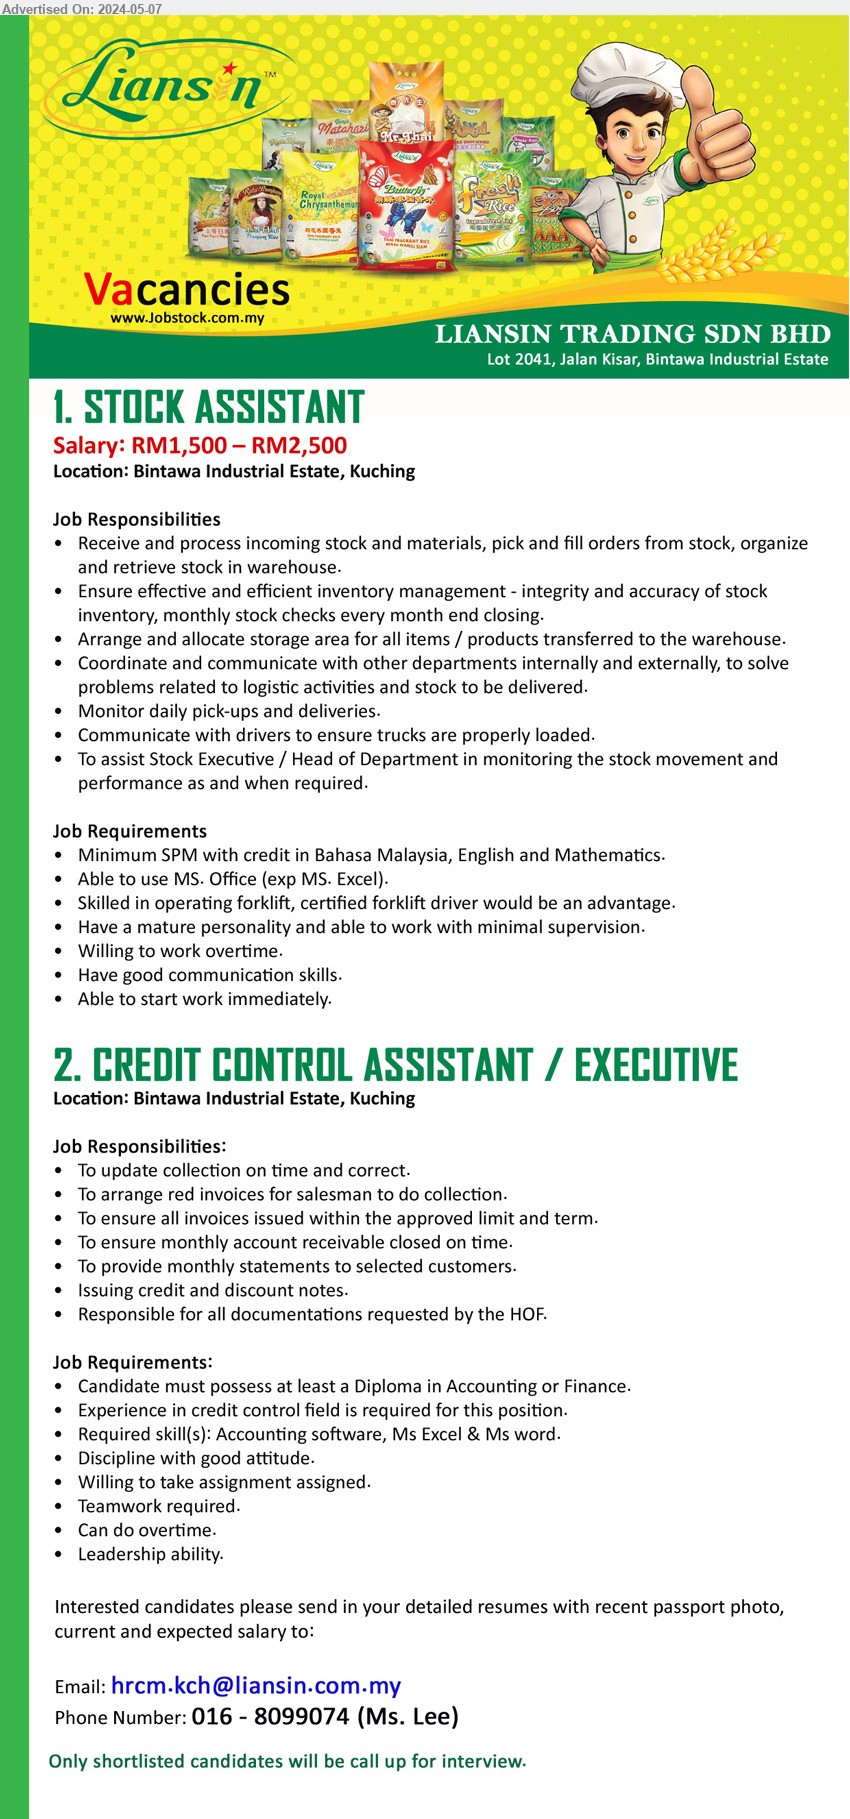 LIANSIN TRADING SDN BHD - 1. STOCK ASSISTANT (Kuching), Salary: RM1,500 – RM2,500, SPM with credit in Bahasa Malaysia, English and Mathematics, Able to use MS. Office (exp MS. Excel).,...
2. CREDIT CONTROL ASSISTANT / EXECUTIVE (Kuching),  Diploma in Accounting or Finance, Experience in credit control field is required for this position.,...
Call 016-8099074  / Email resume to ...